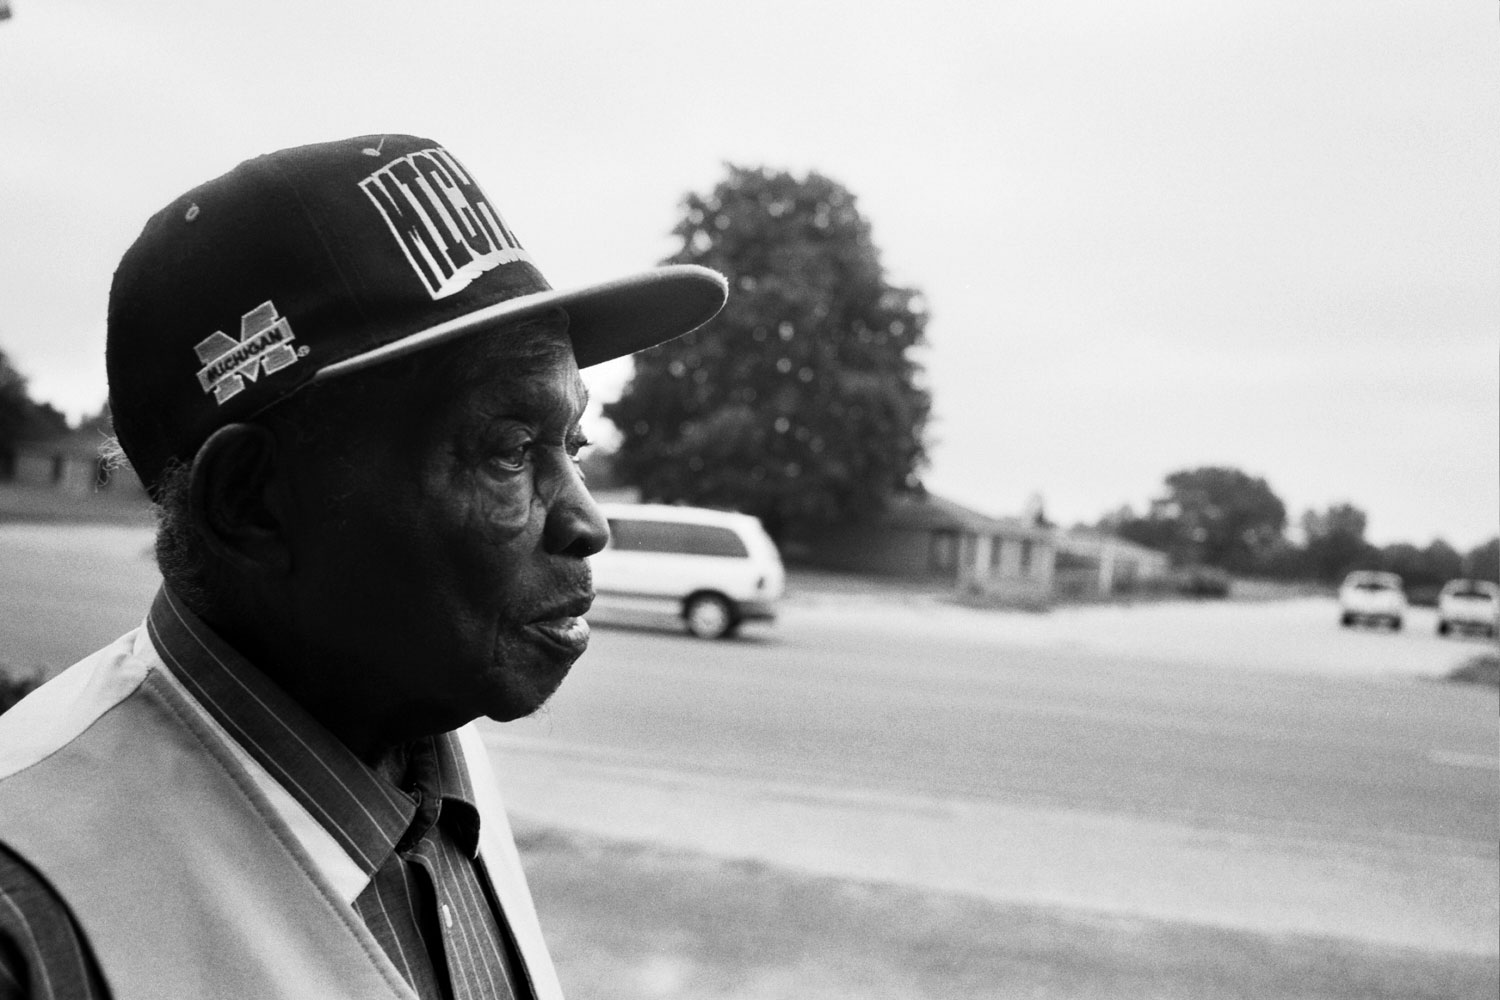 David "Honeyboy" Edwards, one of the first Mississippi Delta blues musicians who recently died August 29th at age 96